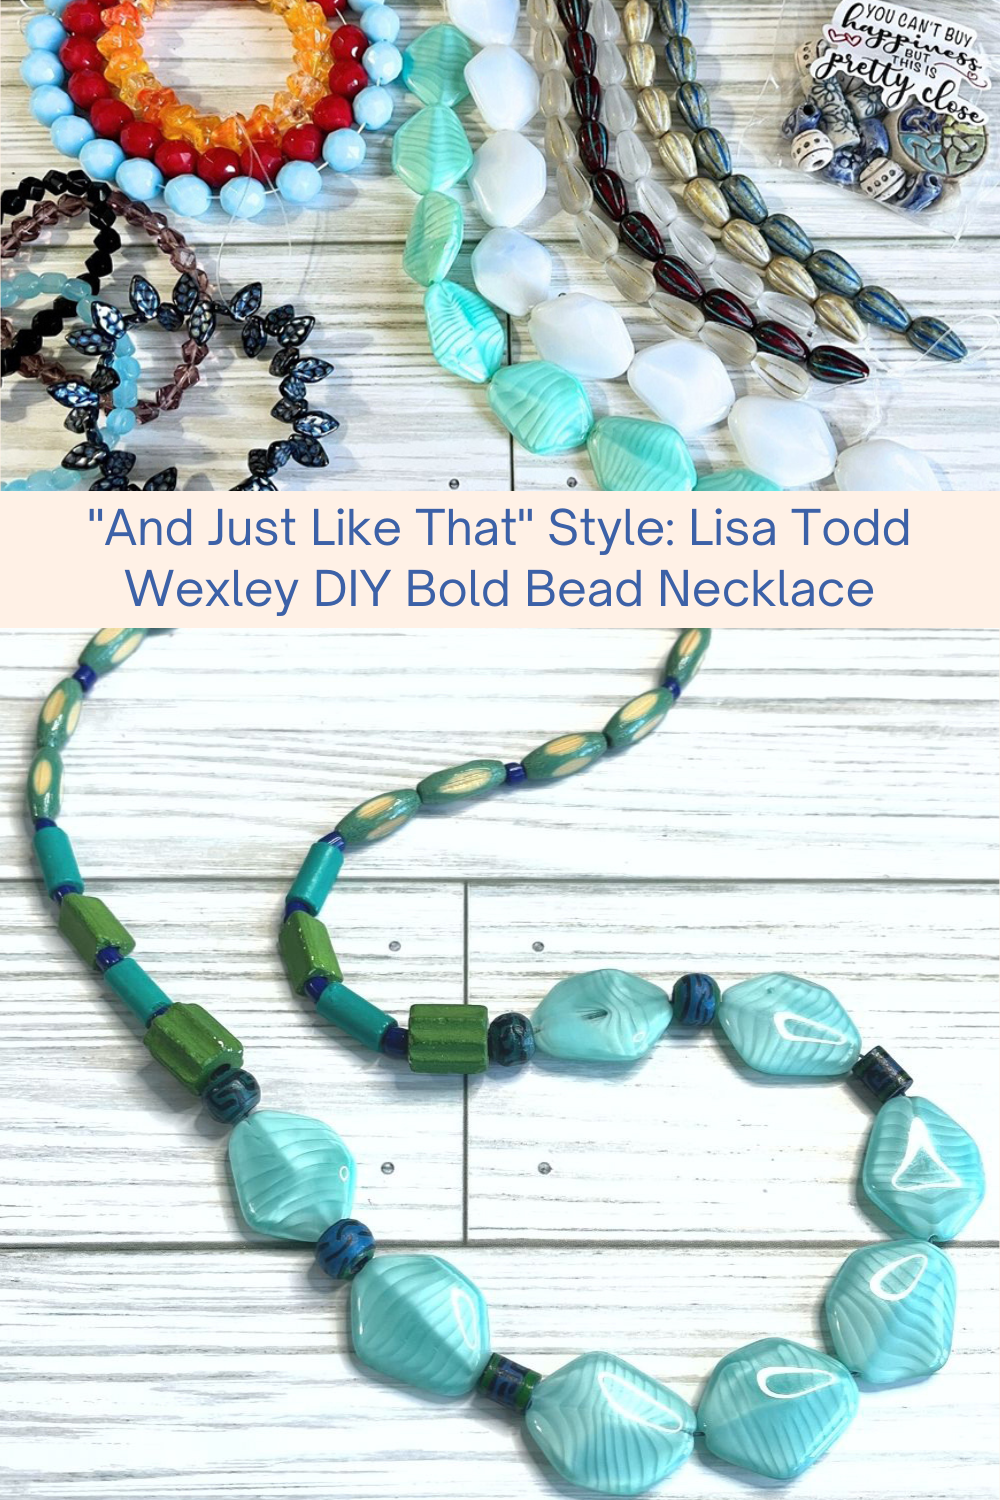 And Just Like That Style Lisa Todd Wexley DIY Bold Bead Necklace